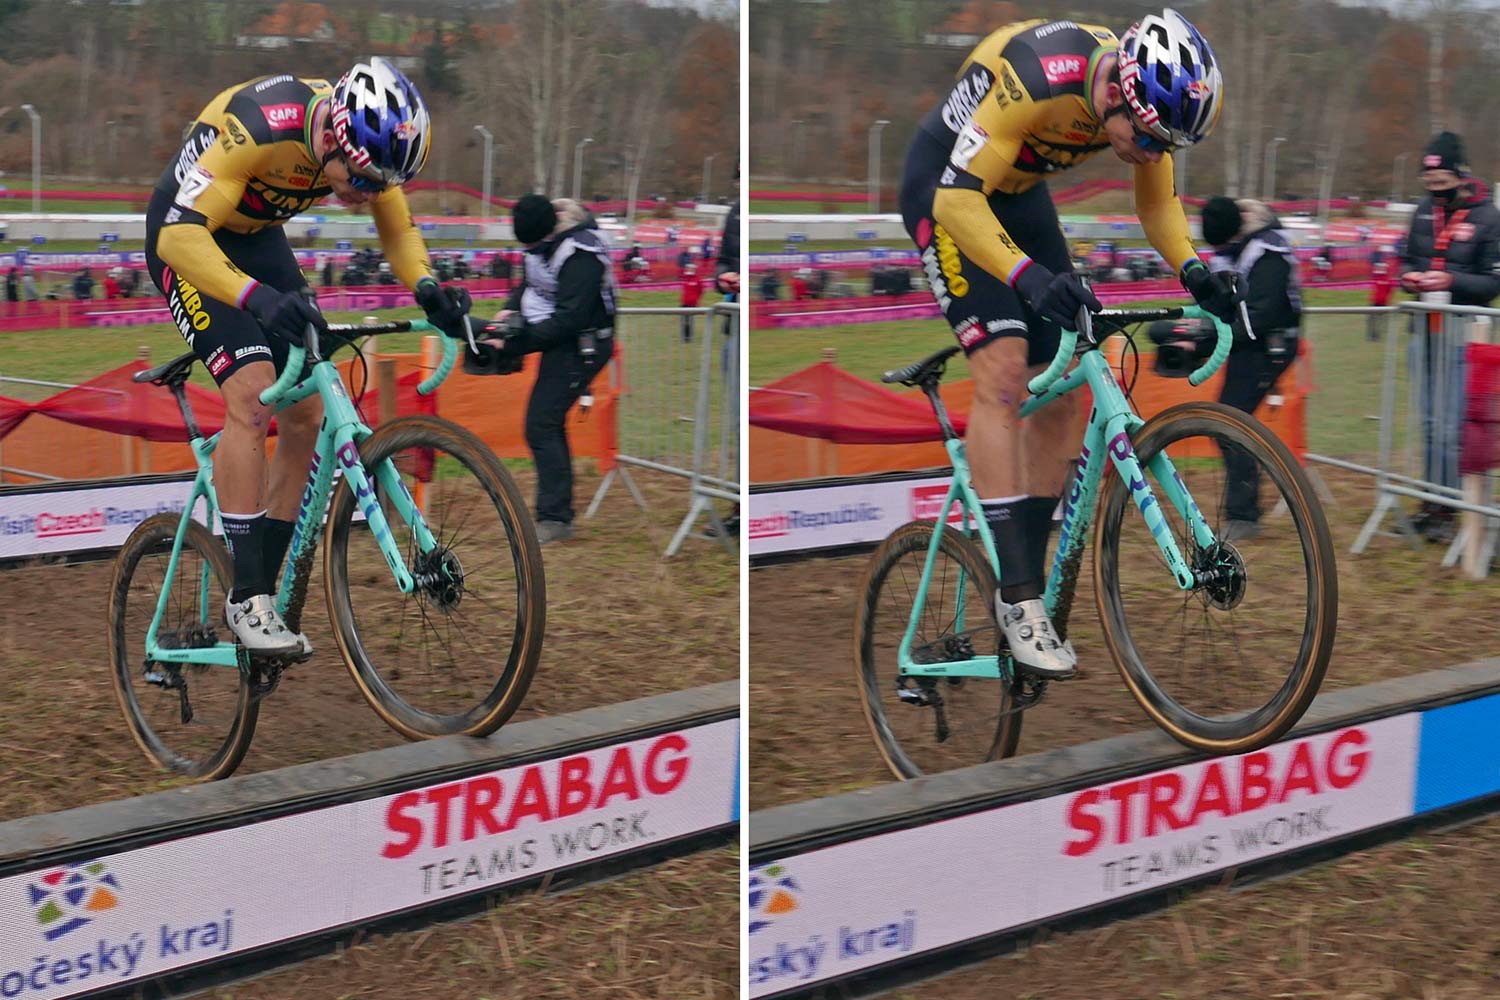 CX Pro Bike Check: Bianchi Zolder Pro carbon cyclocross bike, Wout van Aert at UCI Cyclo-Cross World Cup Tabor, bunny hopping barriers